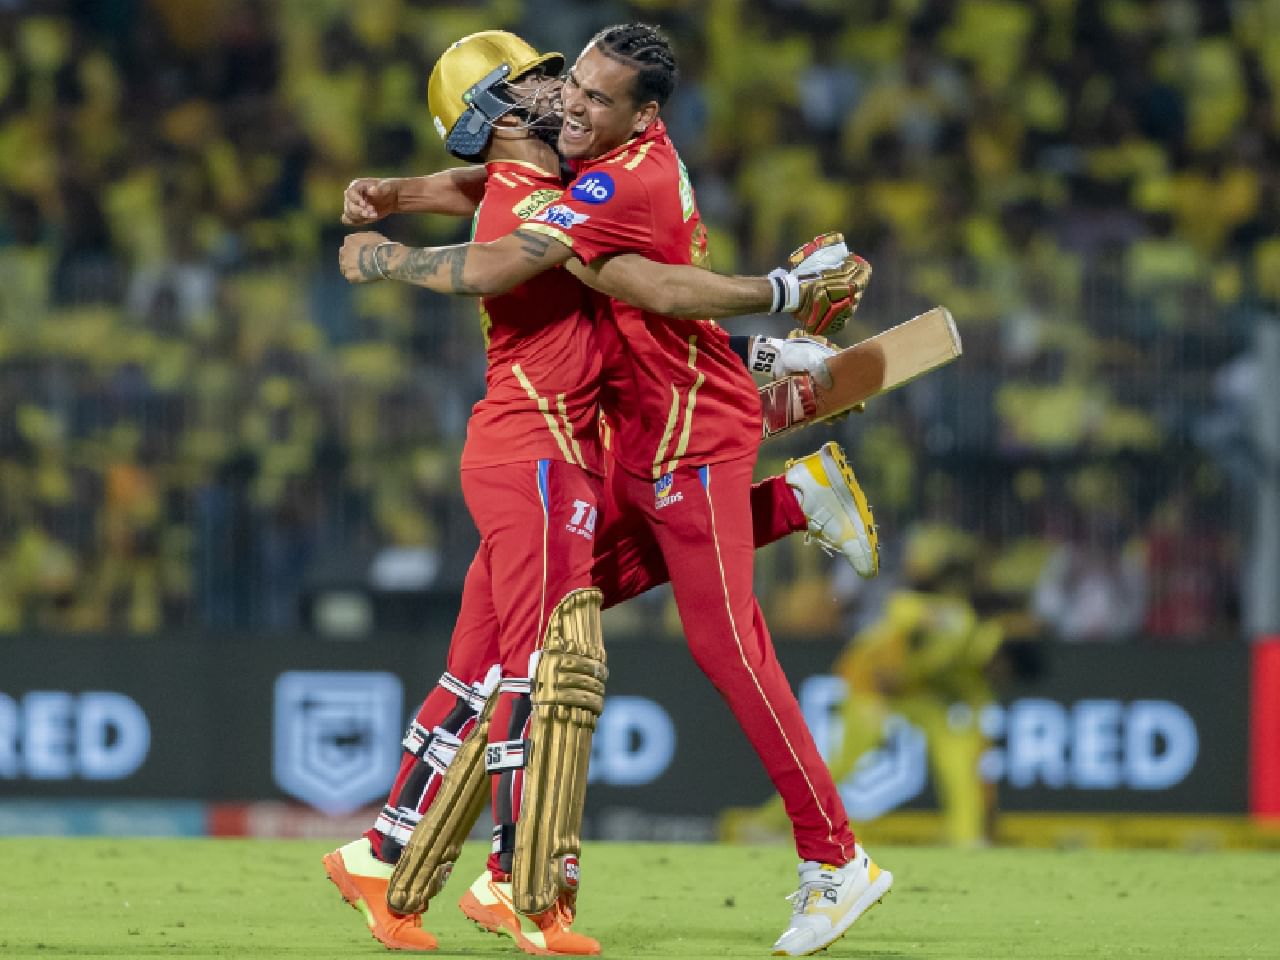 Punjab Kings show the power of team effort as they pip CSK at Dhoni’s fortress